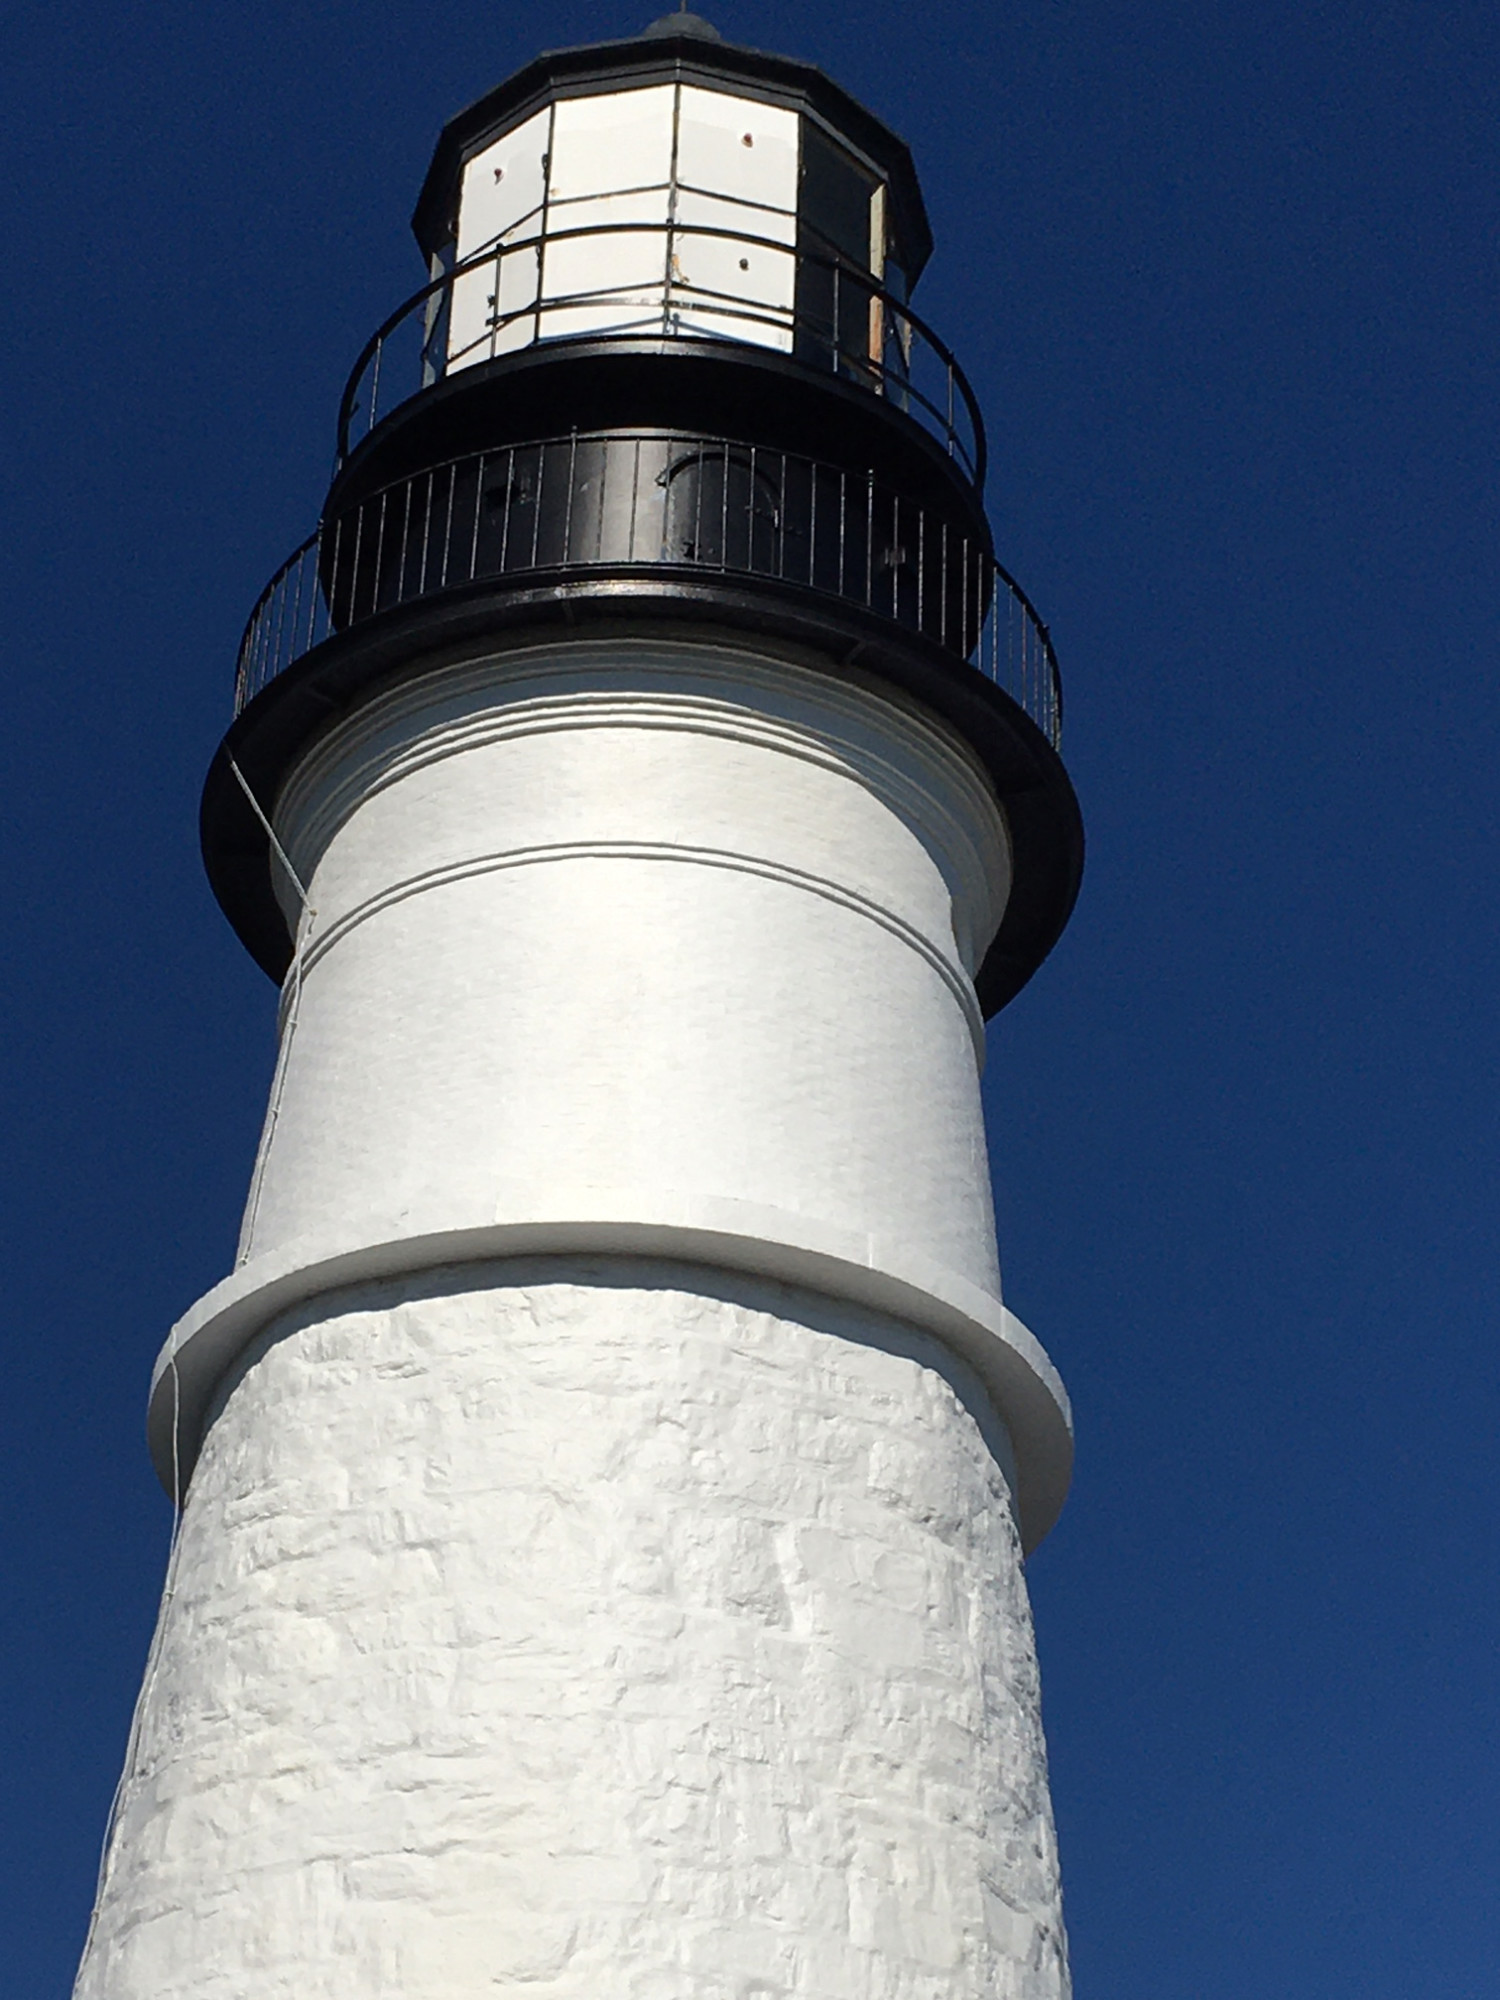 Looking up at a white lighthouse tower with the blue sky.